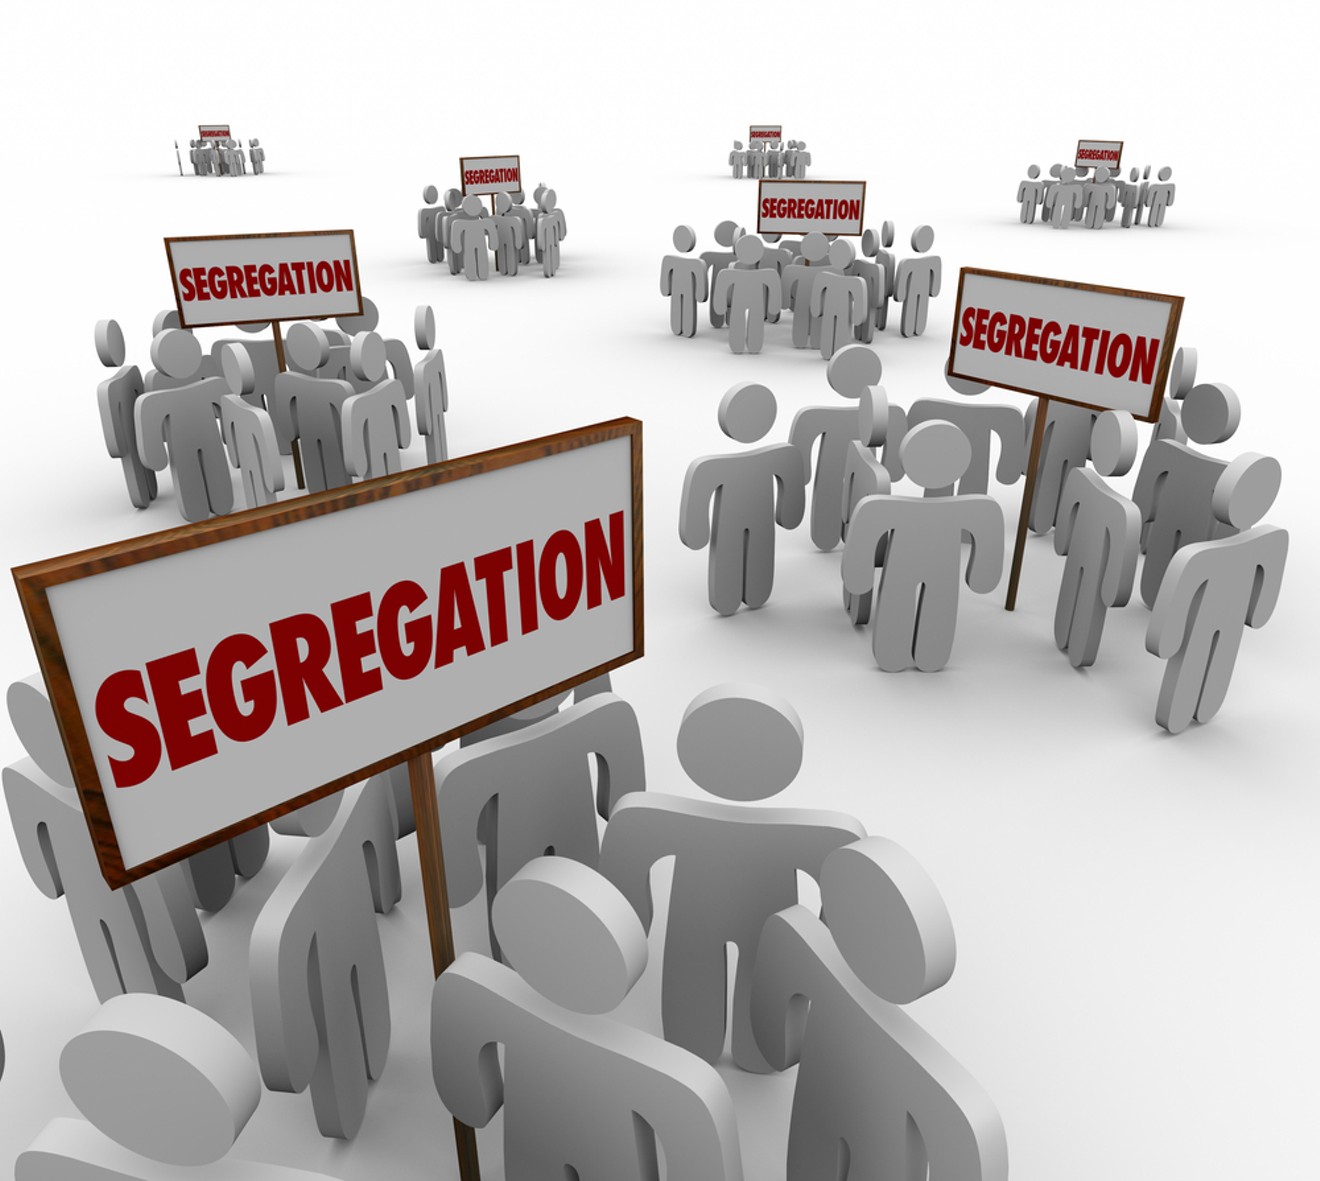 Segregation is the one big thing we could fix and really change things.